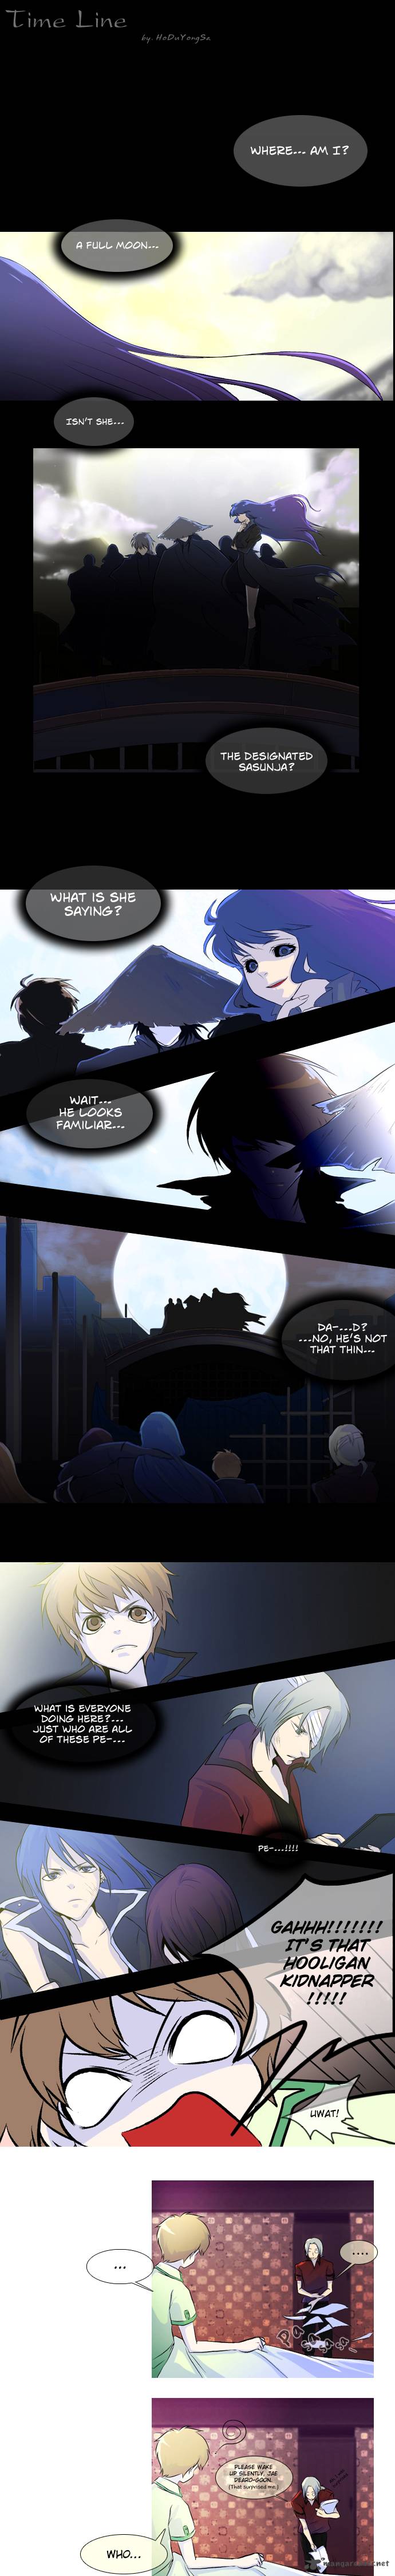 Timeline Chapter 8 Page 2